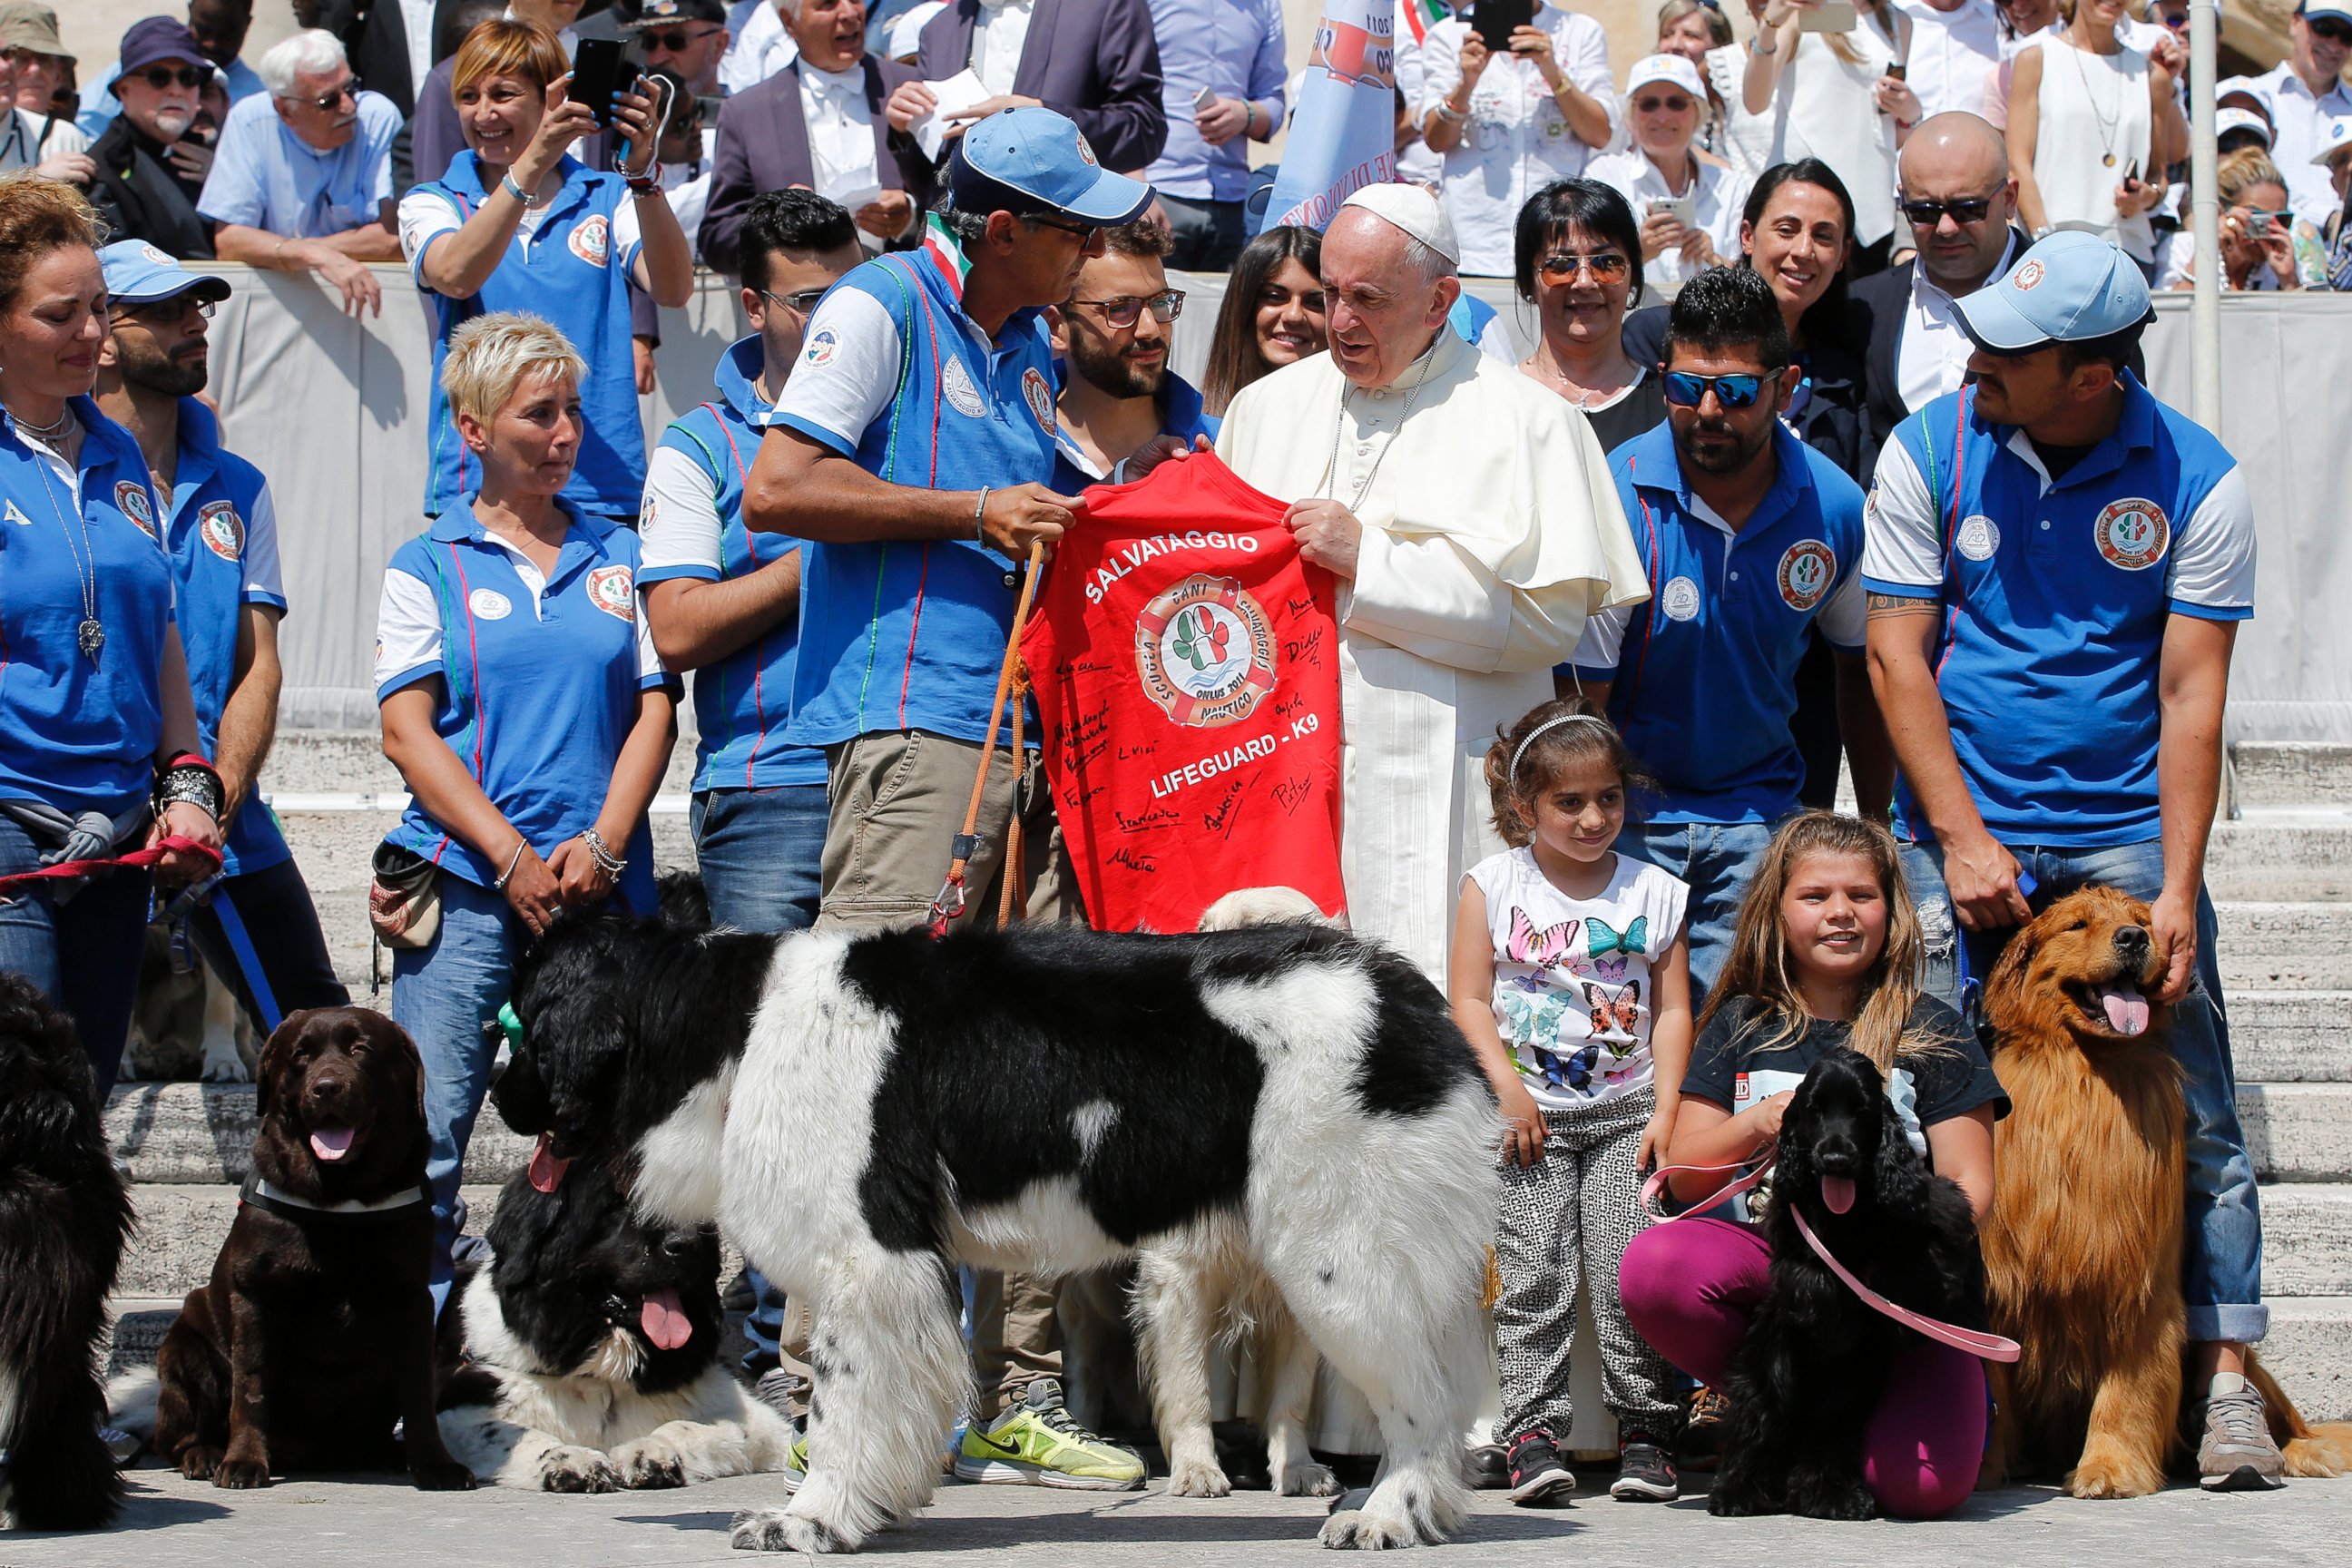 PHOTO: Pope Francis meets with members of a Lifeguard school and their dogs from the Apulian town of Bari, at the end of his weekly general audience in St. Peter's Square at the Vatican, June 8, 2016. 